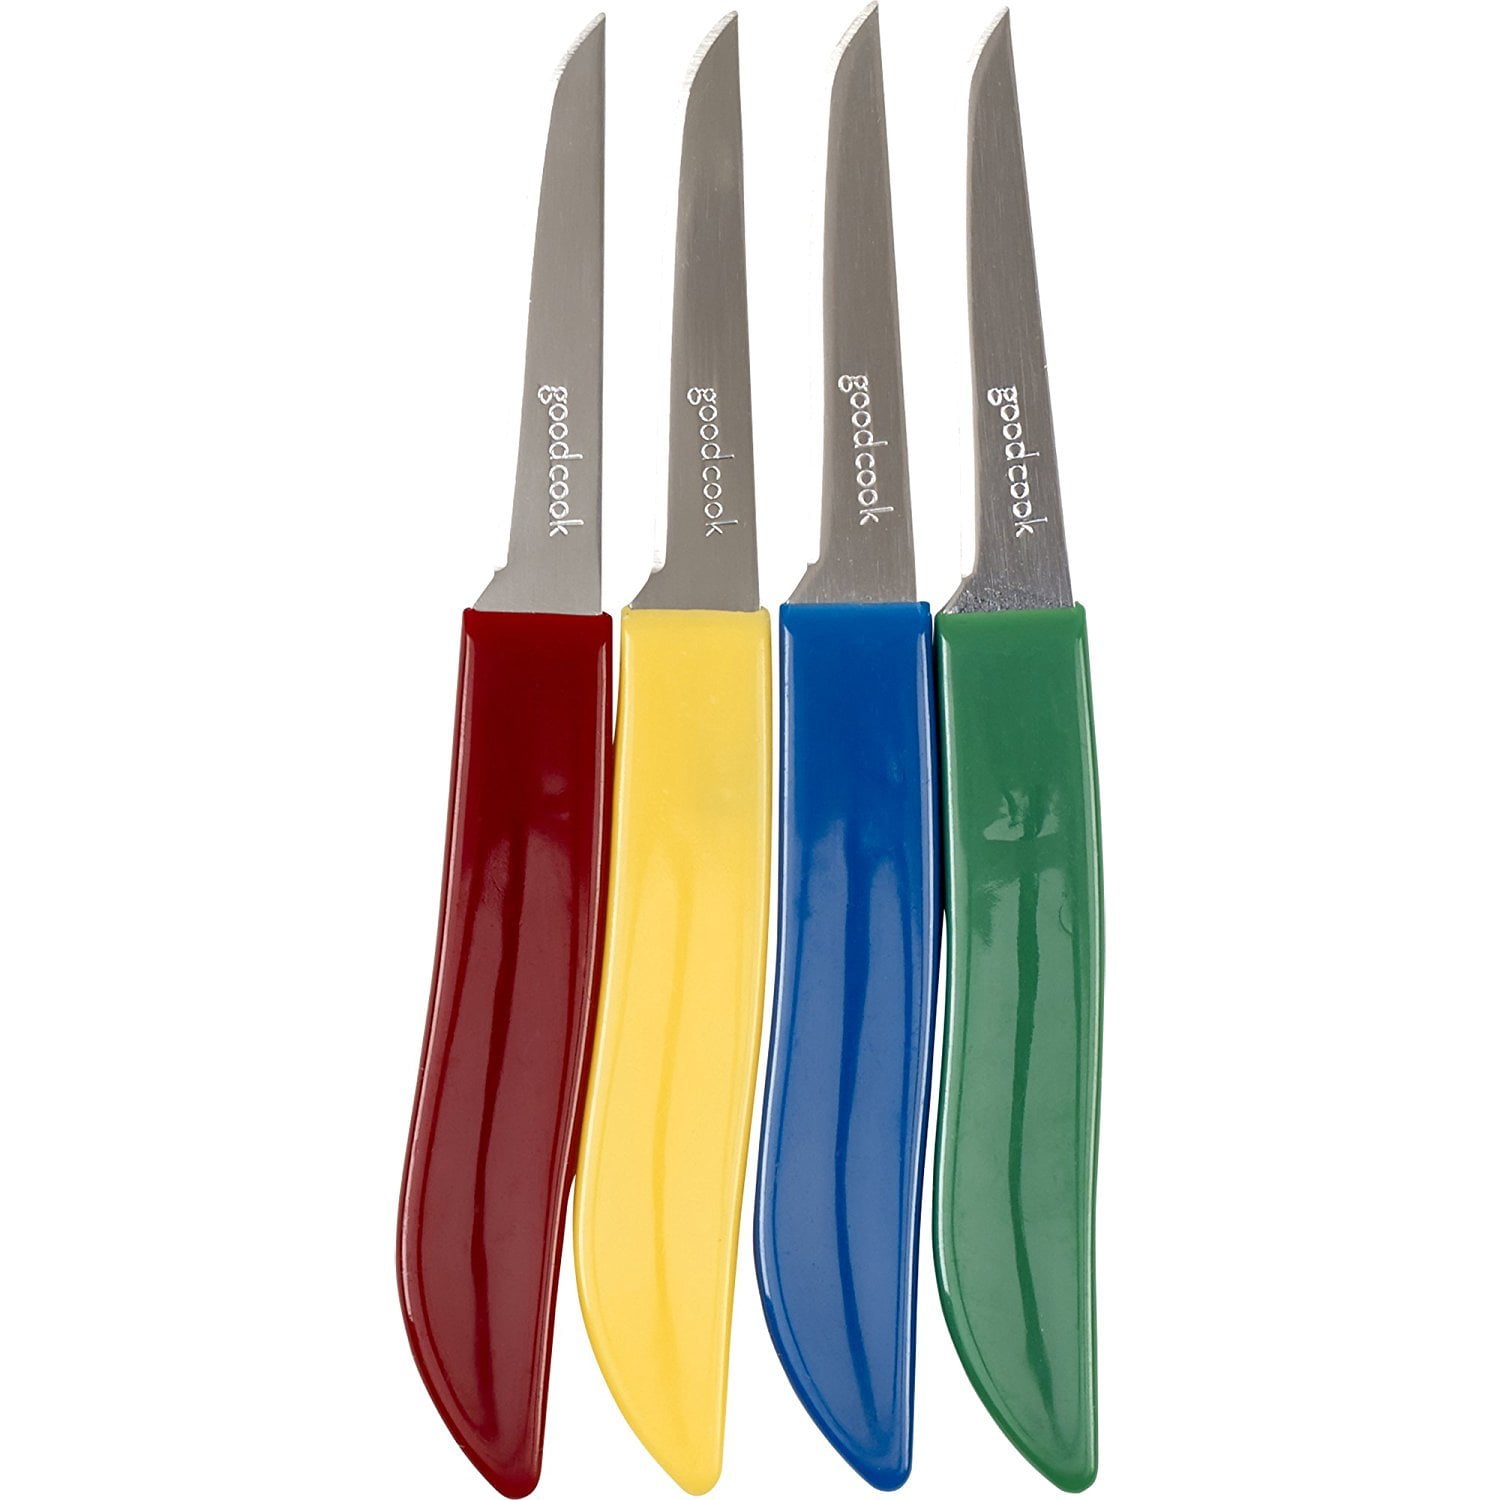 Goodcook Paring Knife Set, 4 Count 